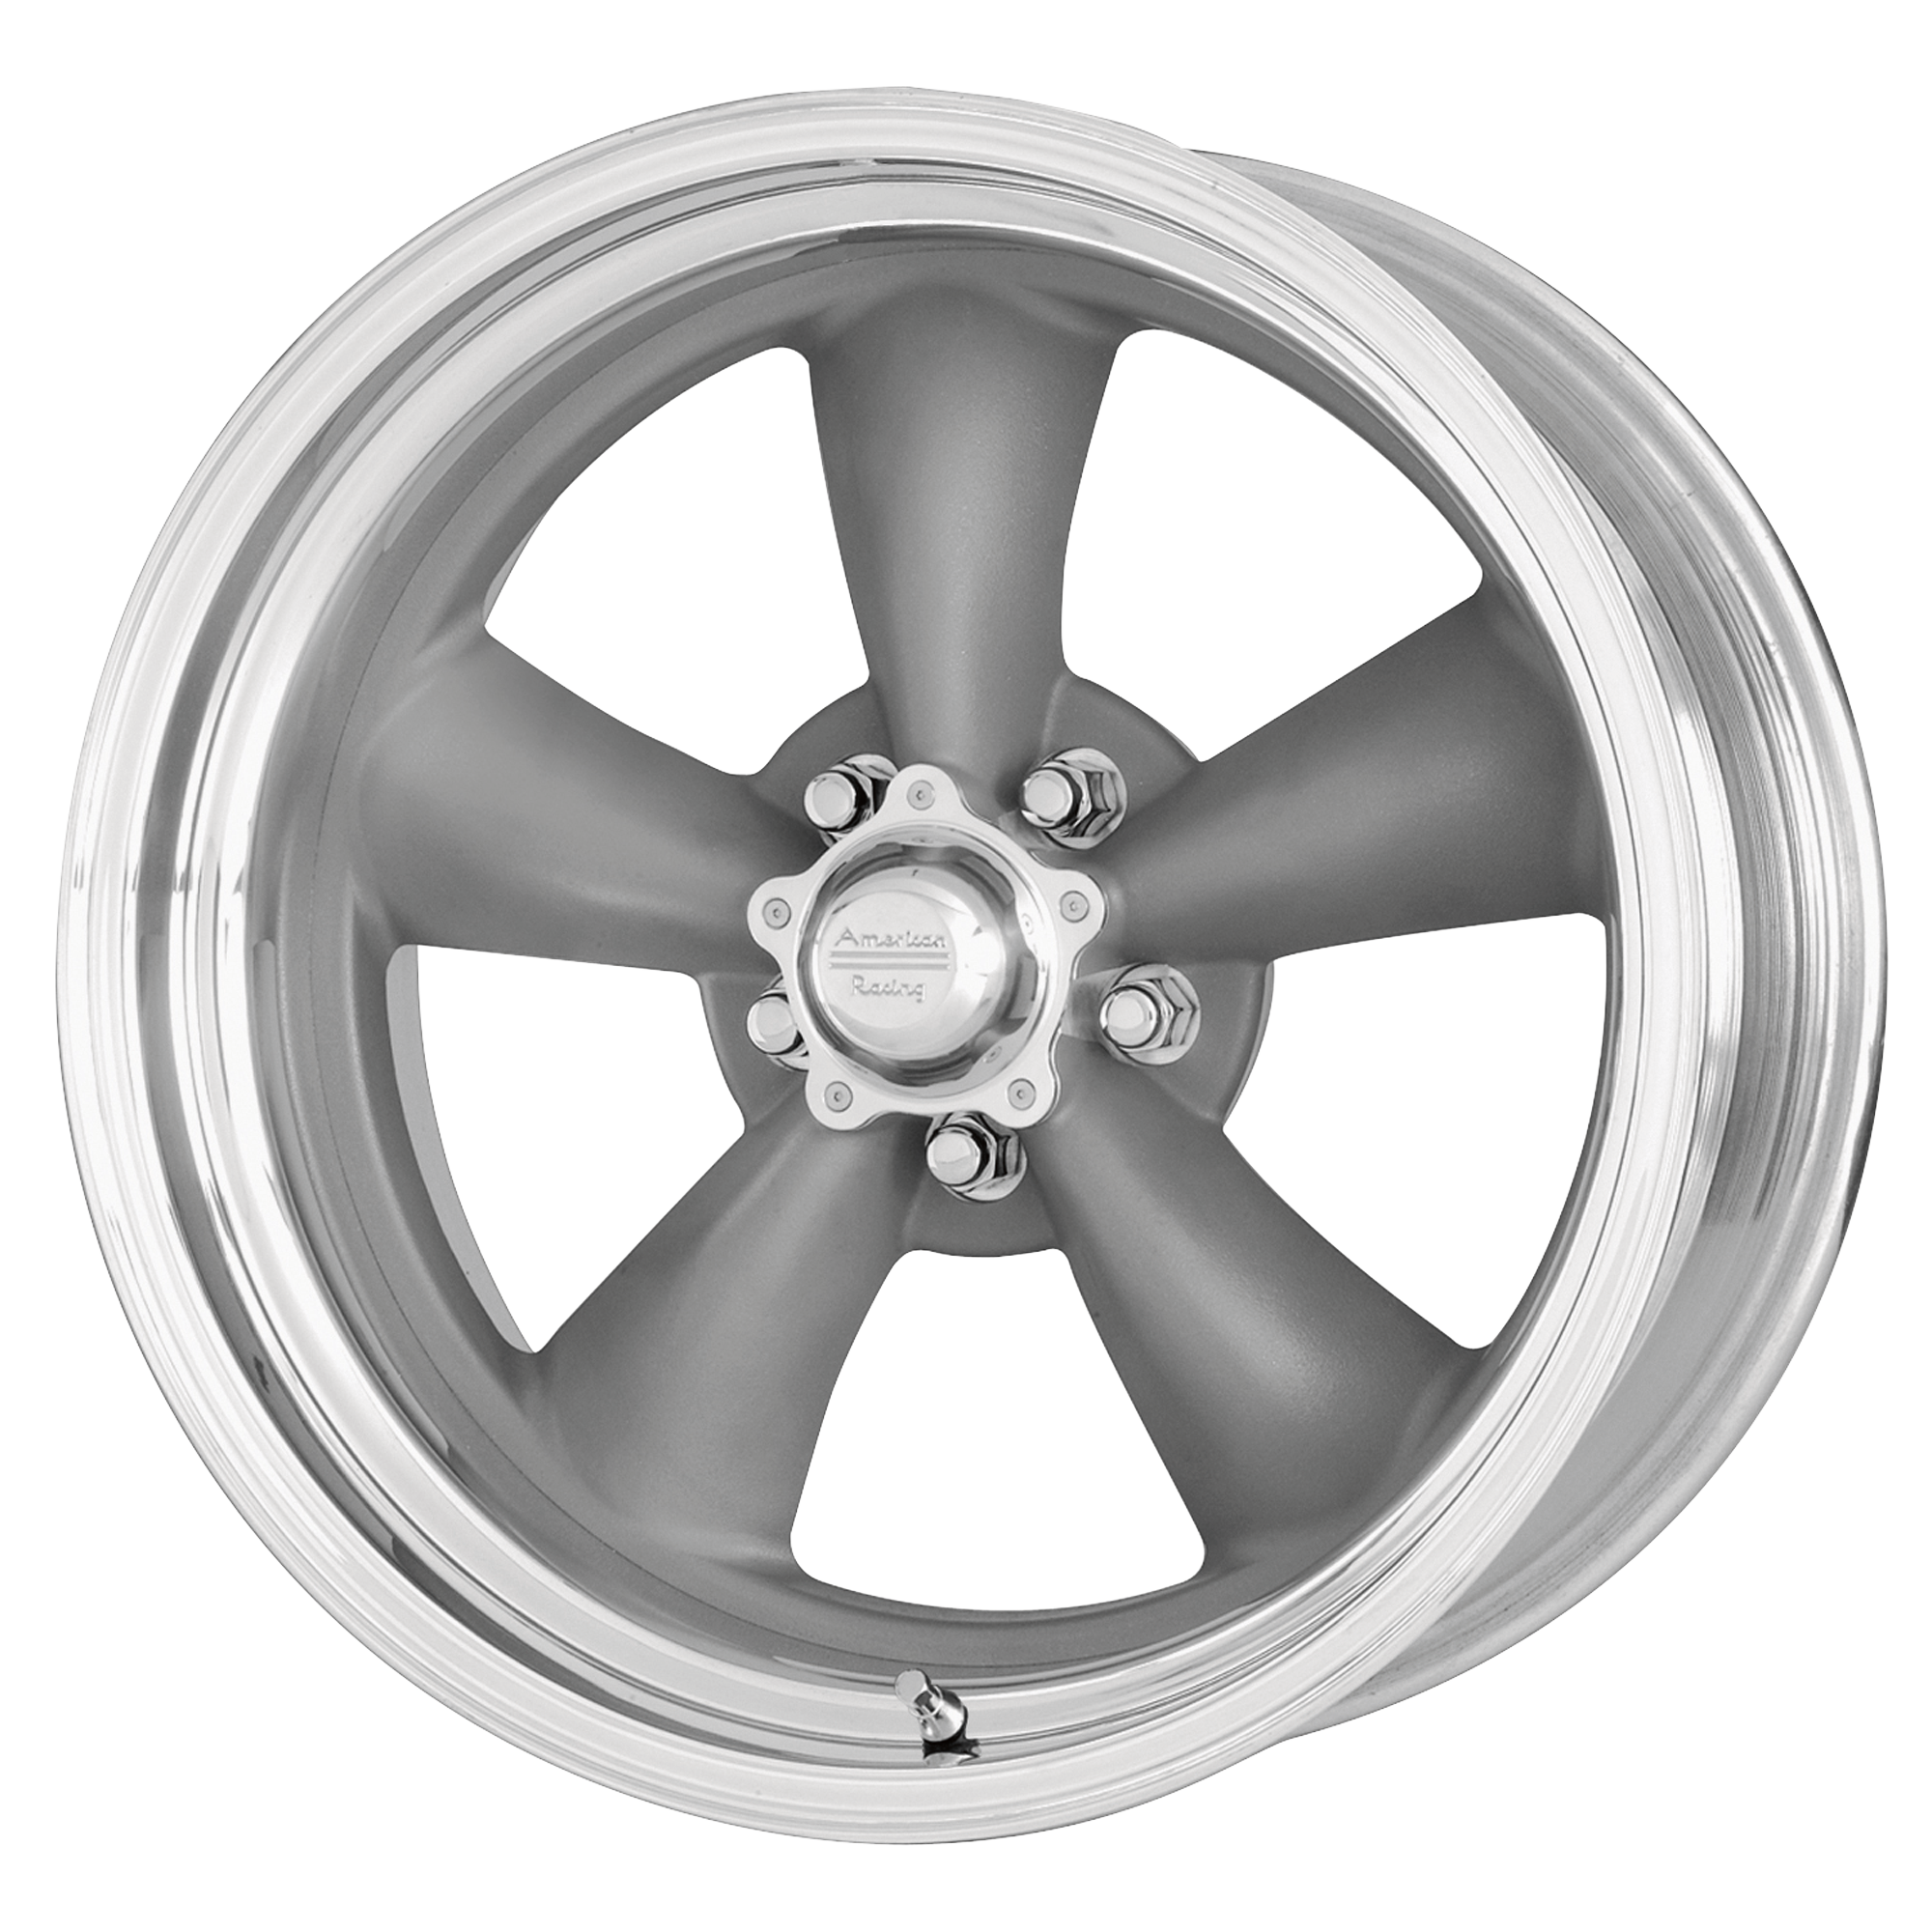 CLASSIC TORQ THRUST II ONE PIECE 17x7 5x127.00 MAG GRAY W/ MACHINED LIP (0 mm) - Tires and Engine Performance